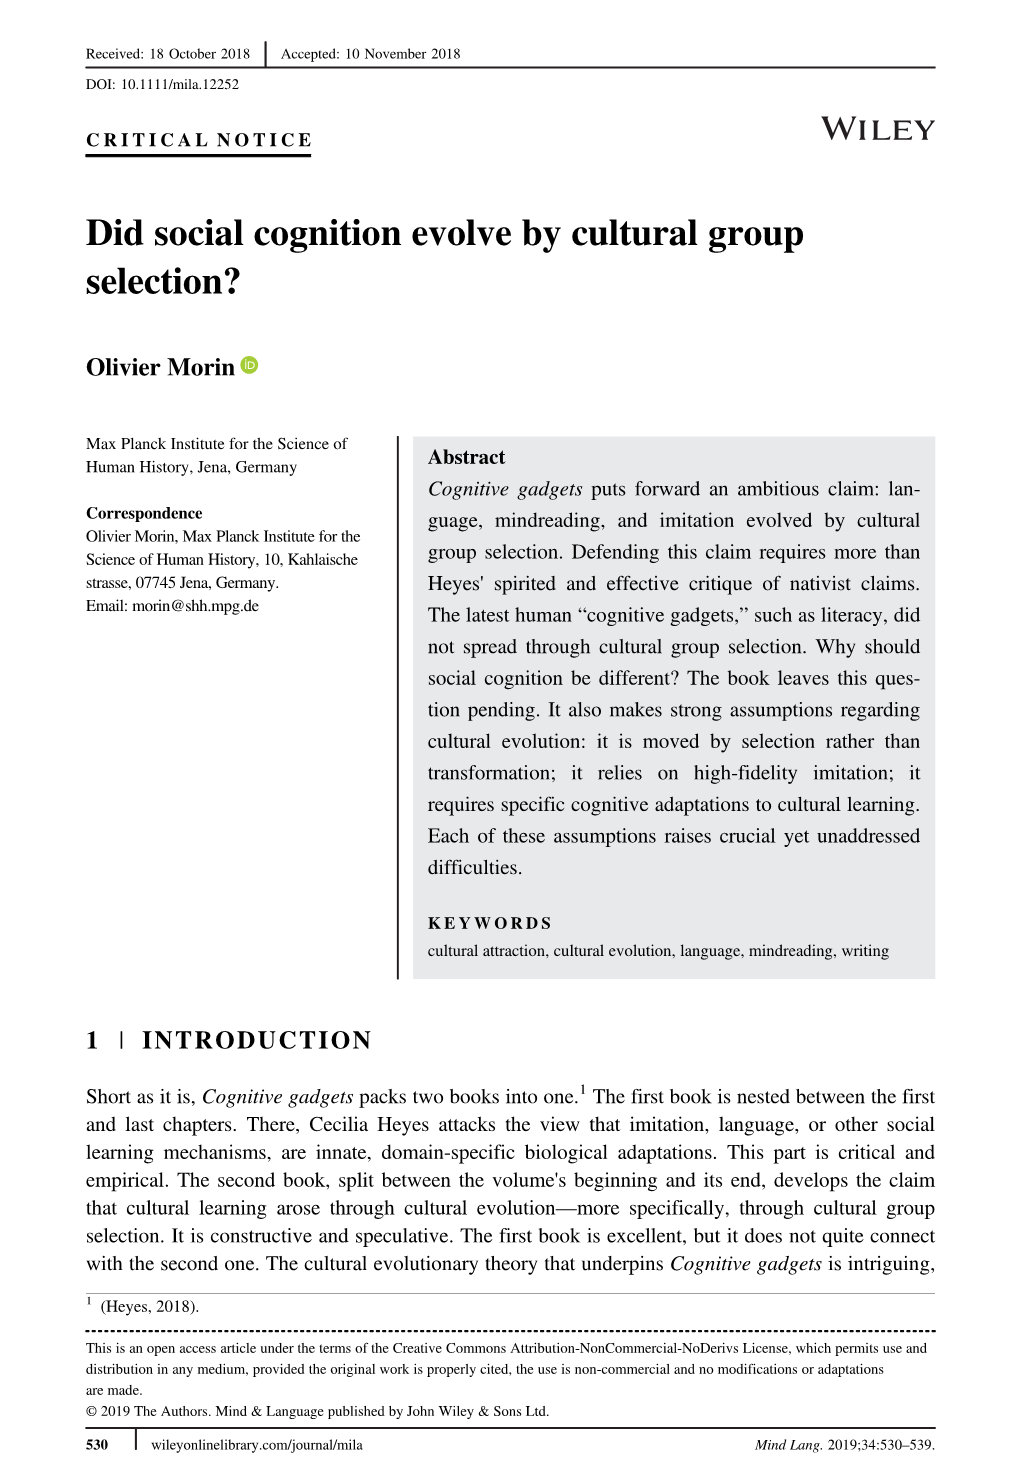 Did Social Cognition Evolve by Cultural Group Selection?